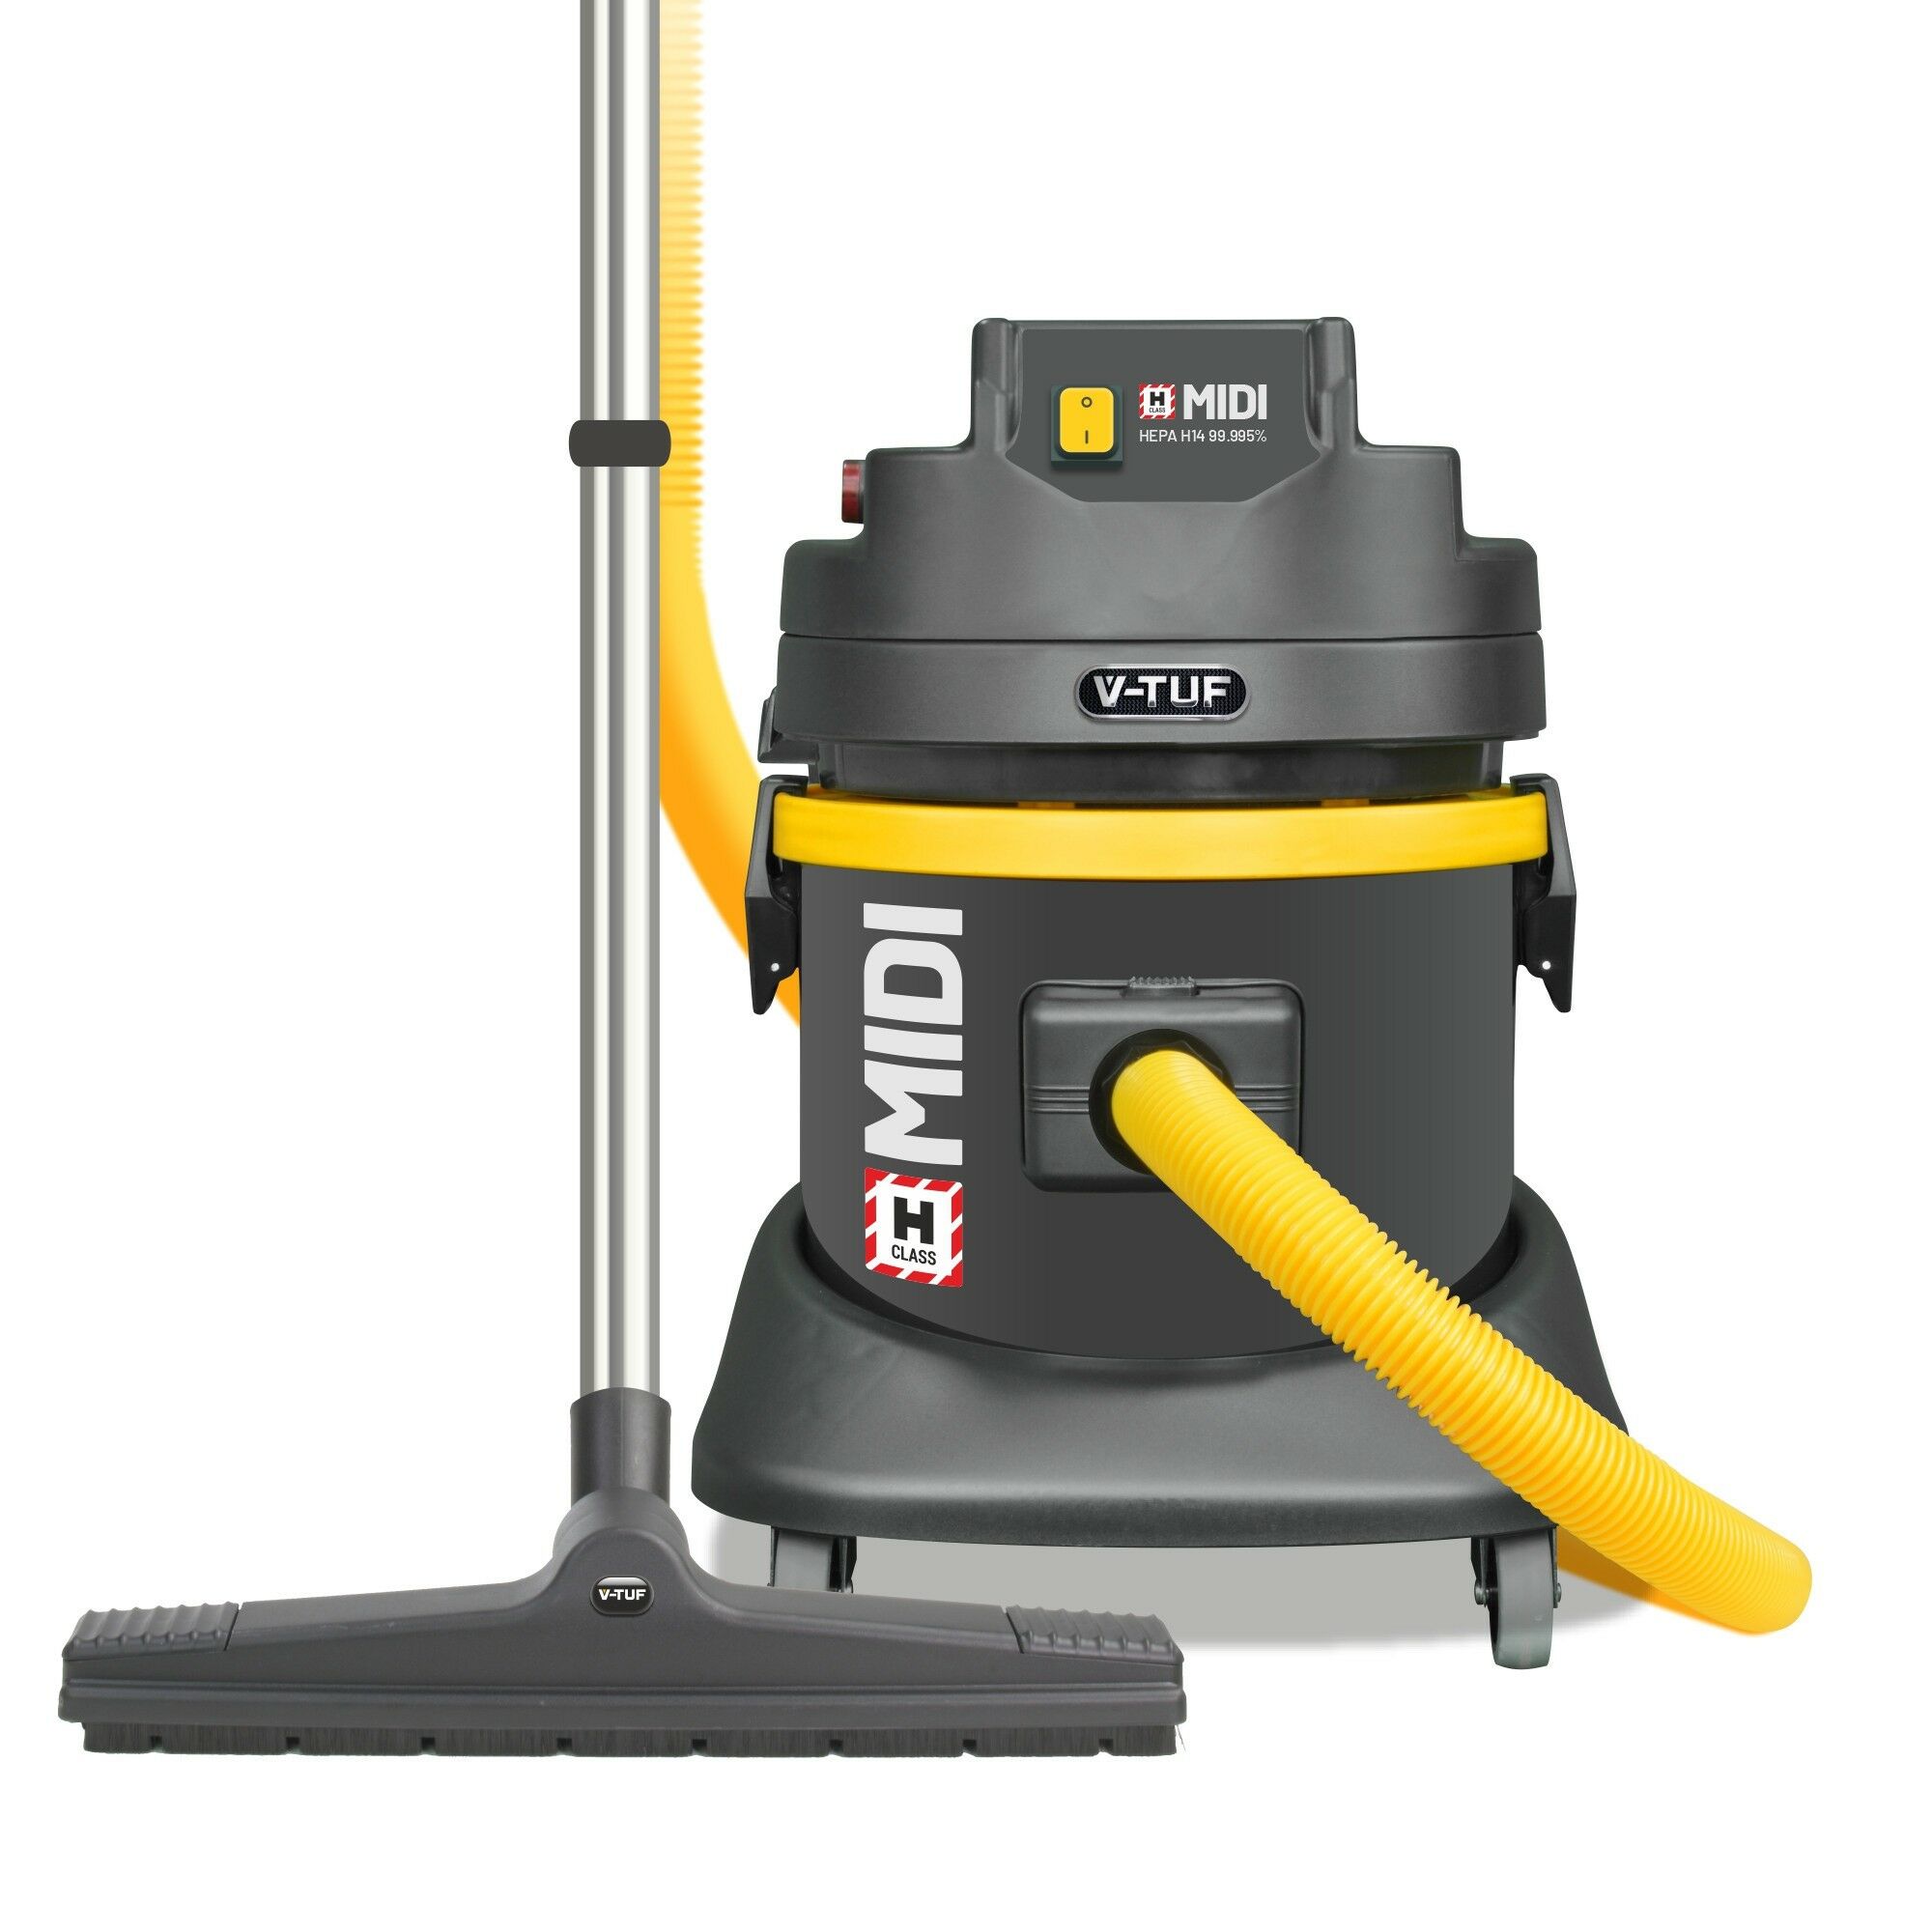 V-TUF MIDIH110 21L H-Class 110v Industrial Dust Extraction Vacuum Cleaner 